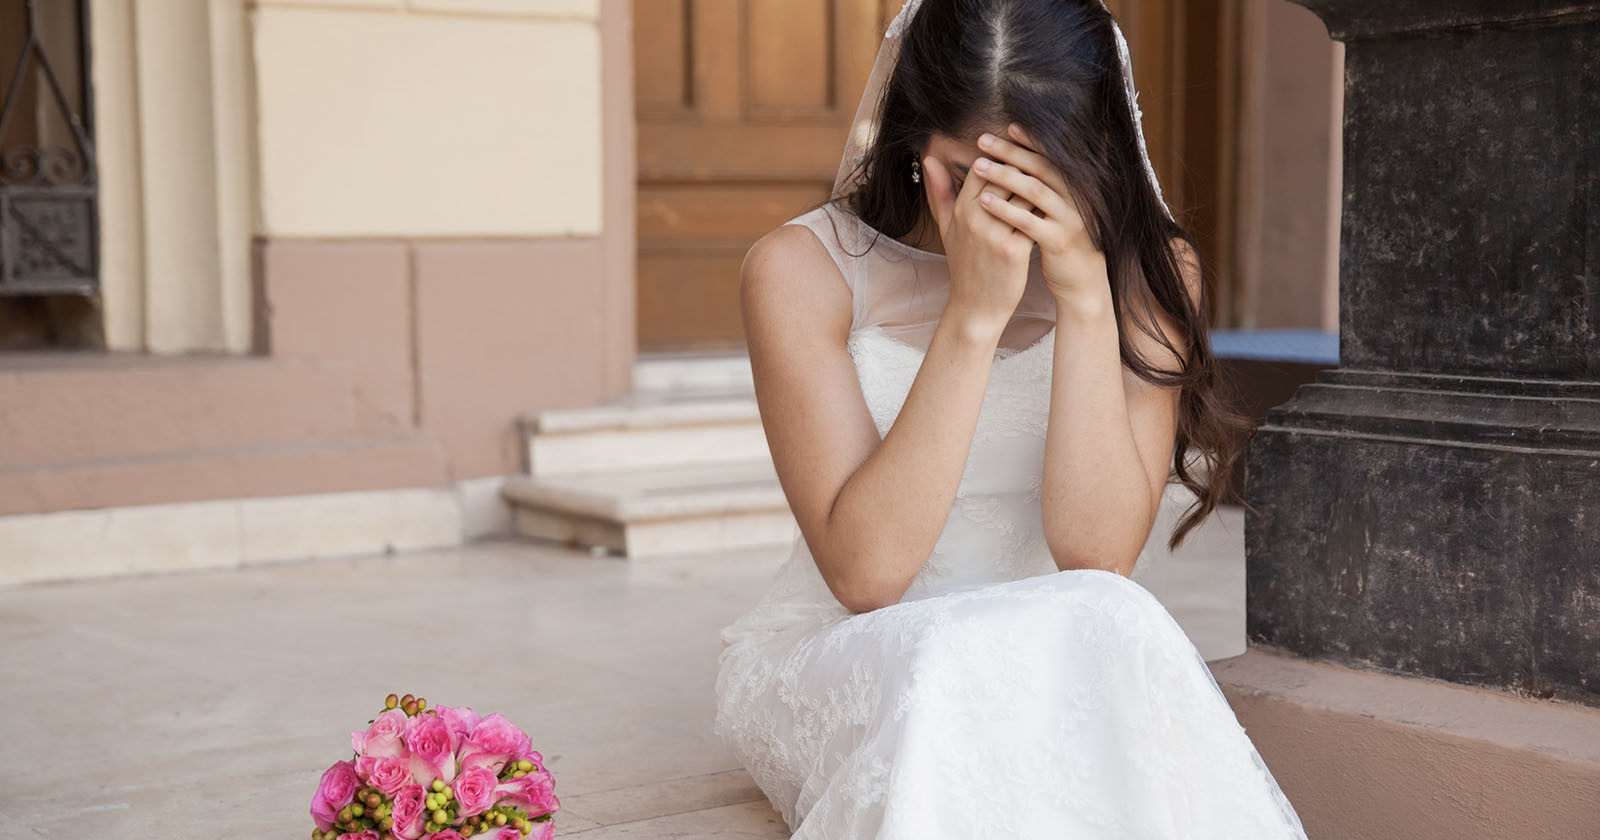 Brides Waiting for Refunds From No-Show Wedding Photographer